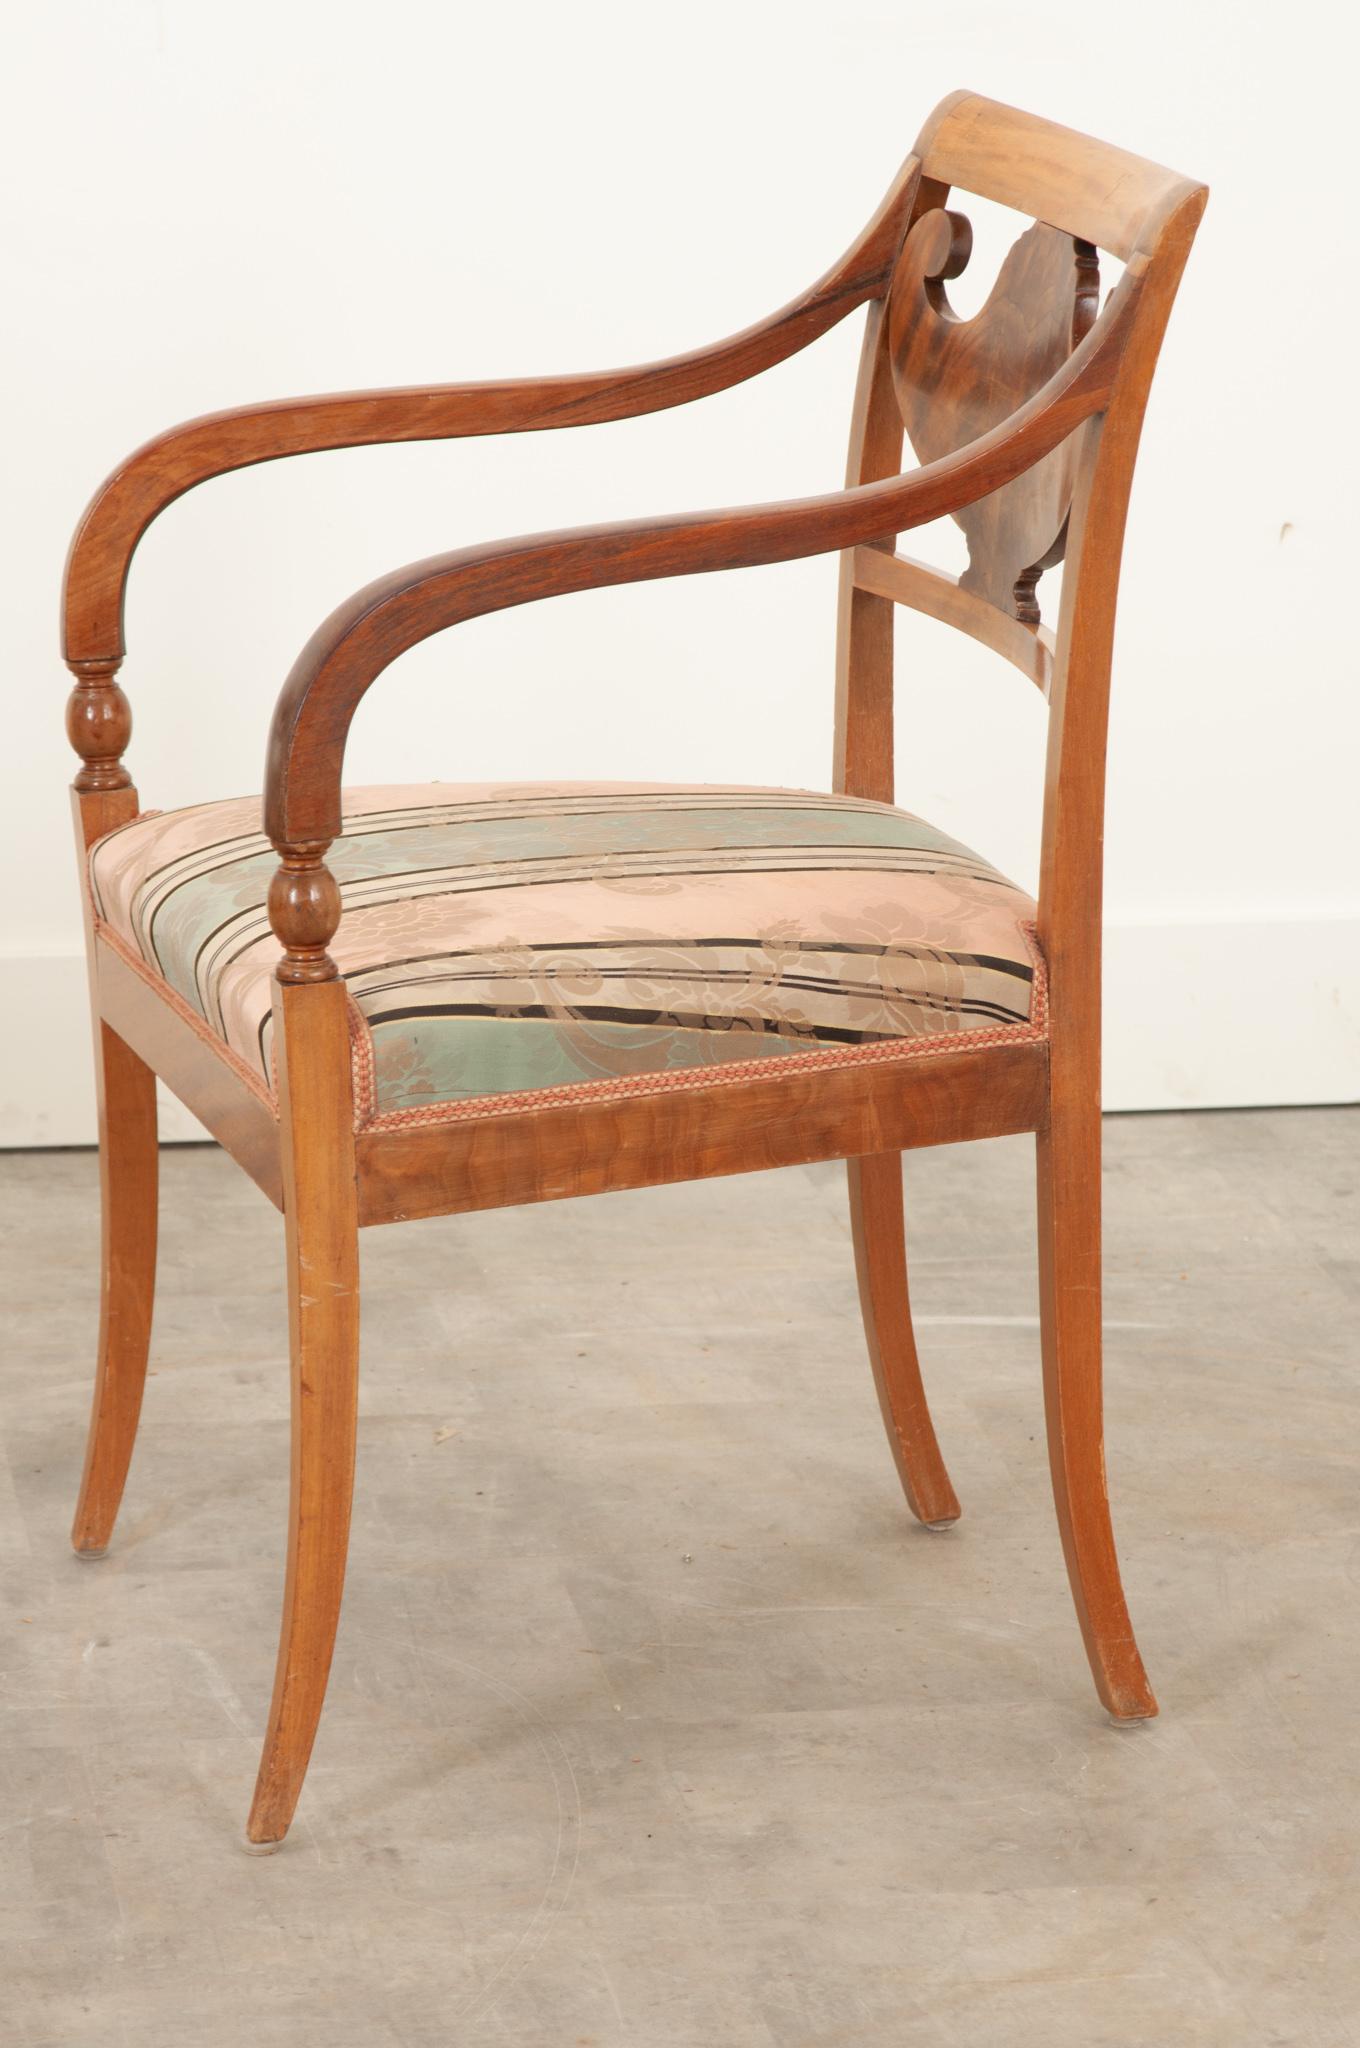 Patinated Pair of 19th Century Dutch Arm Chairs For Sale